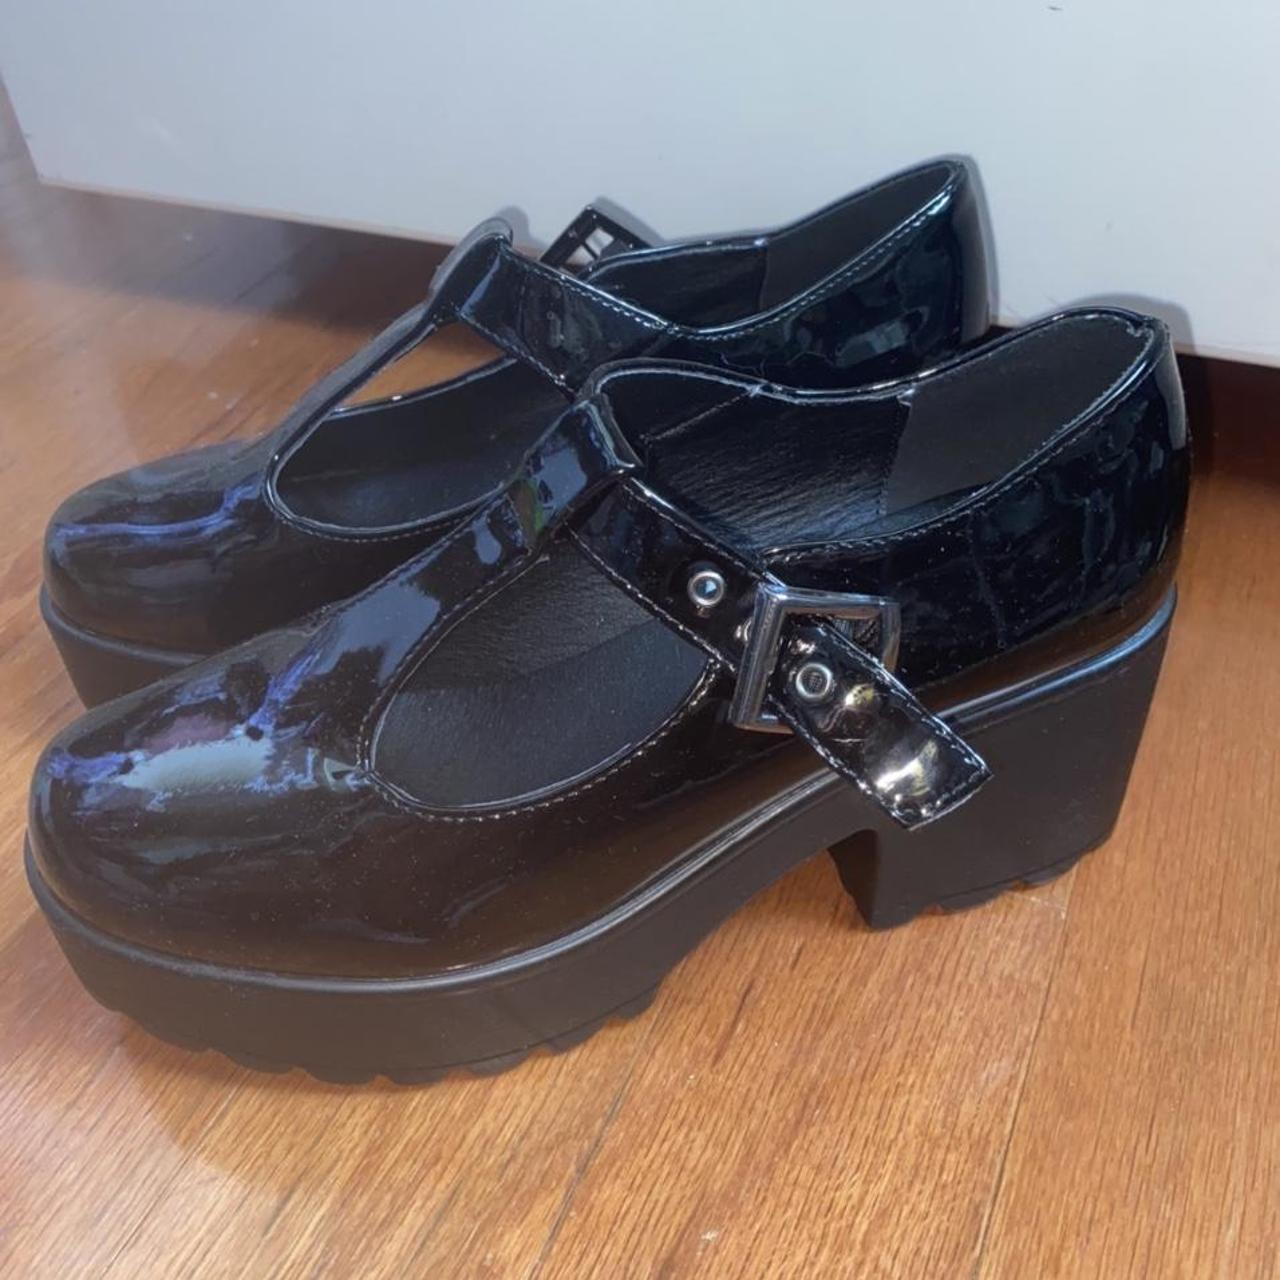 Black healed Mary Janes🖤 so cute and in perfect... - Depop